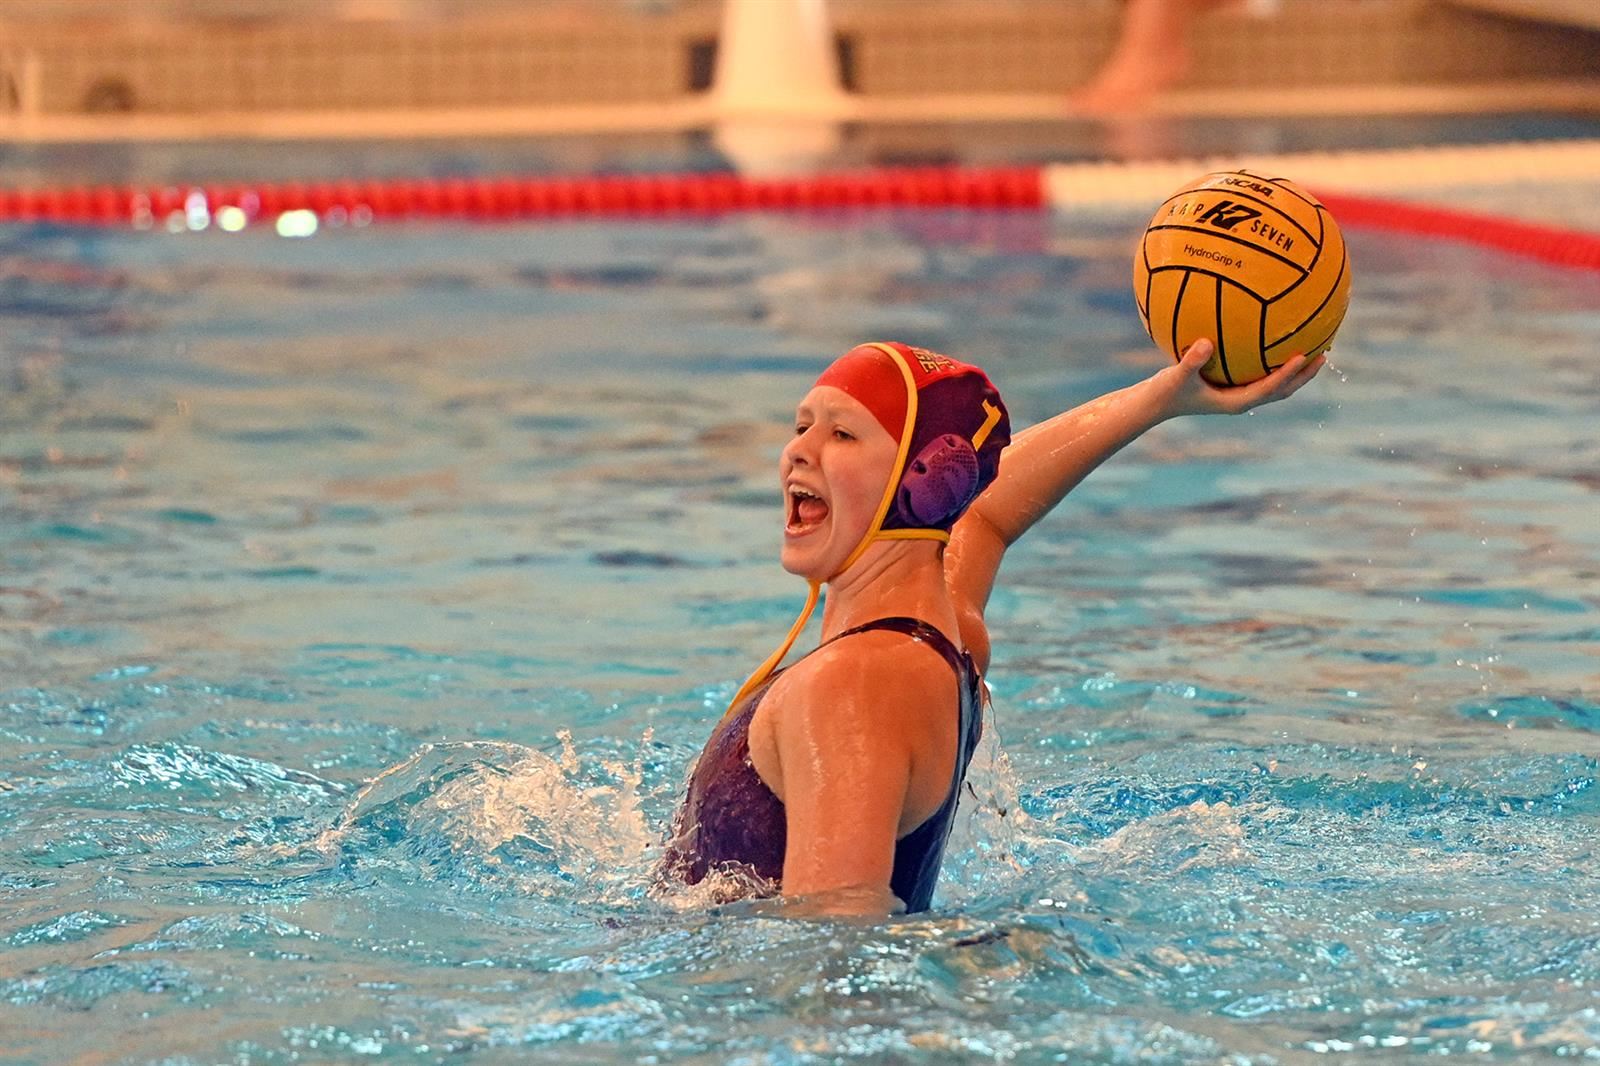 Jersey Village High School senior Evie Riha was named the District 17-6A girls’ water polo Goalkeeper of the Year.